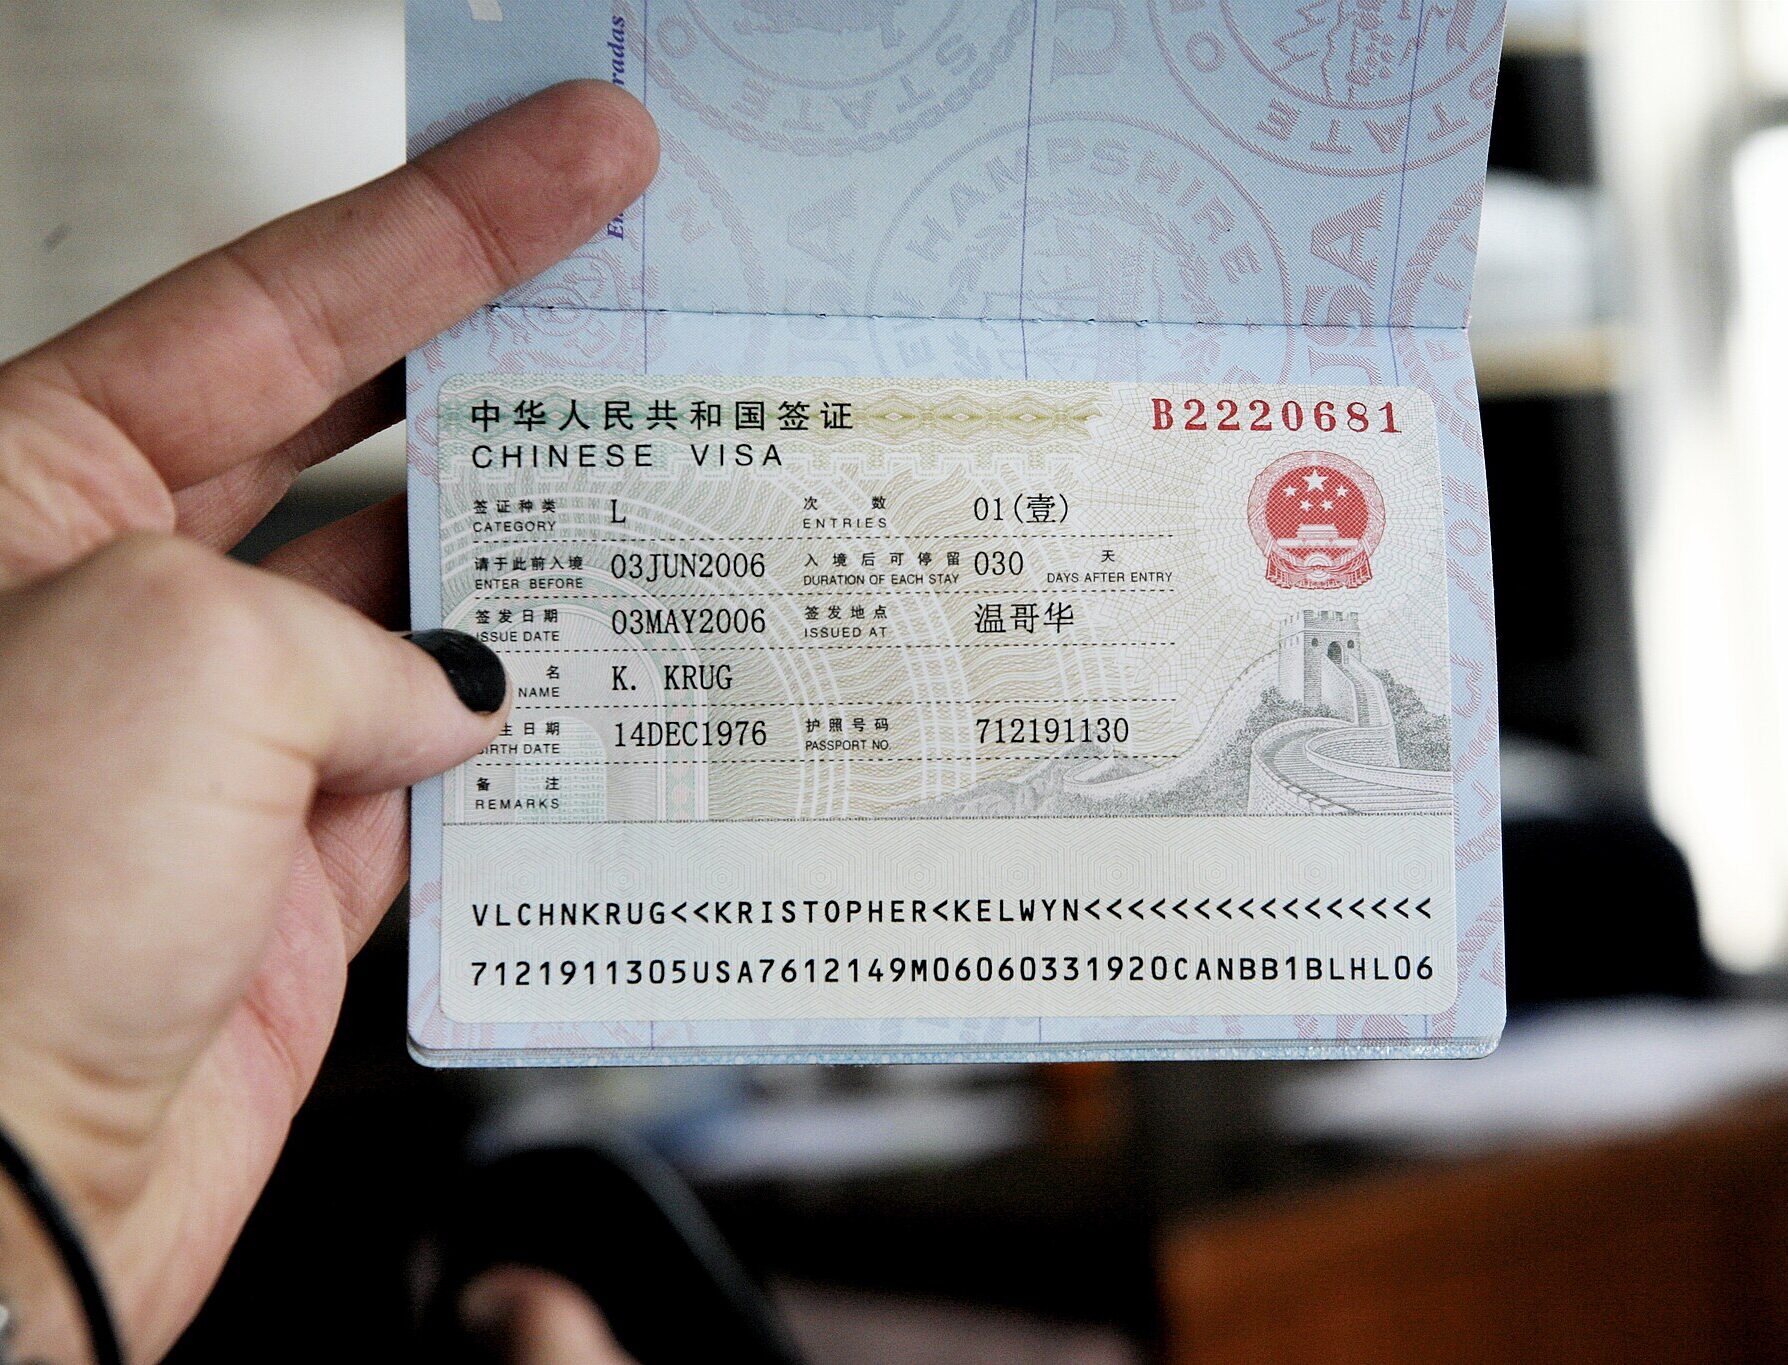 The number of travelers needing visa stamps like the one issued by the Chinese government is decreasing.